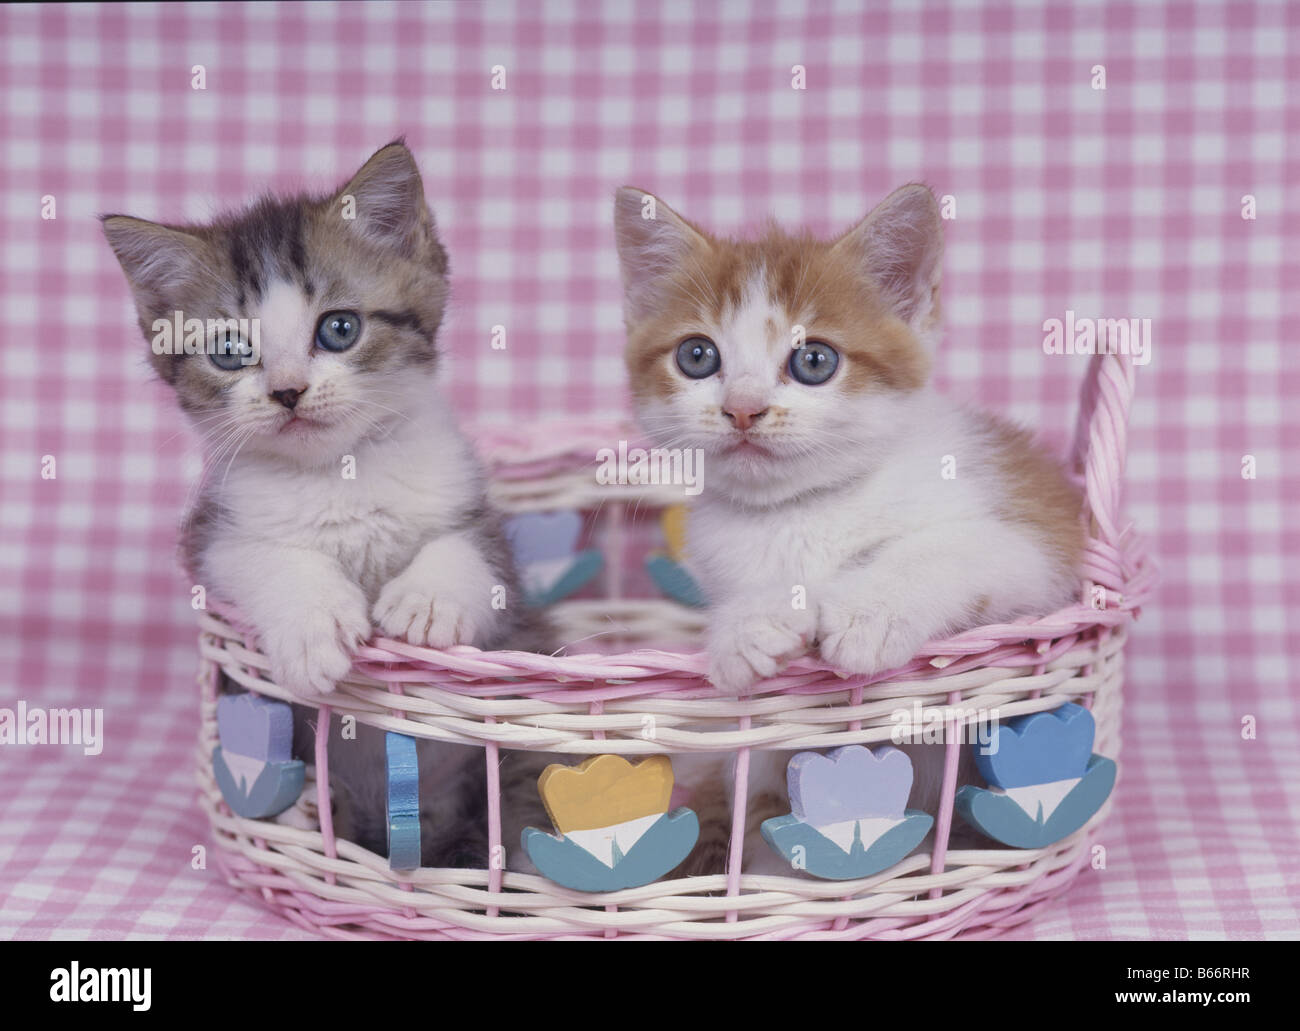 Two Kittens in Basket Stock Photo